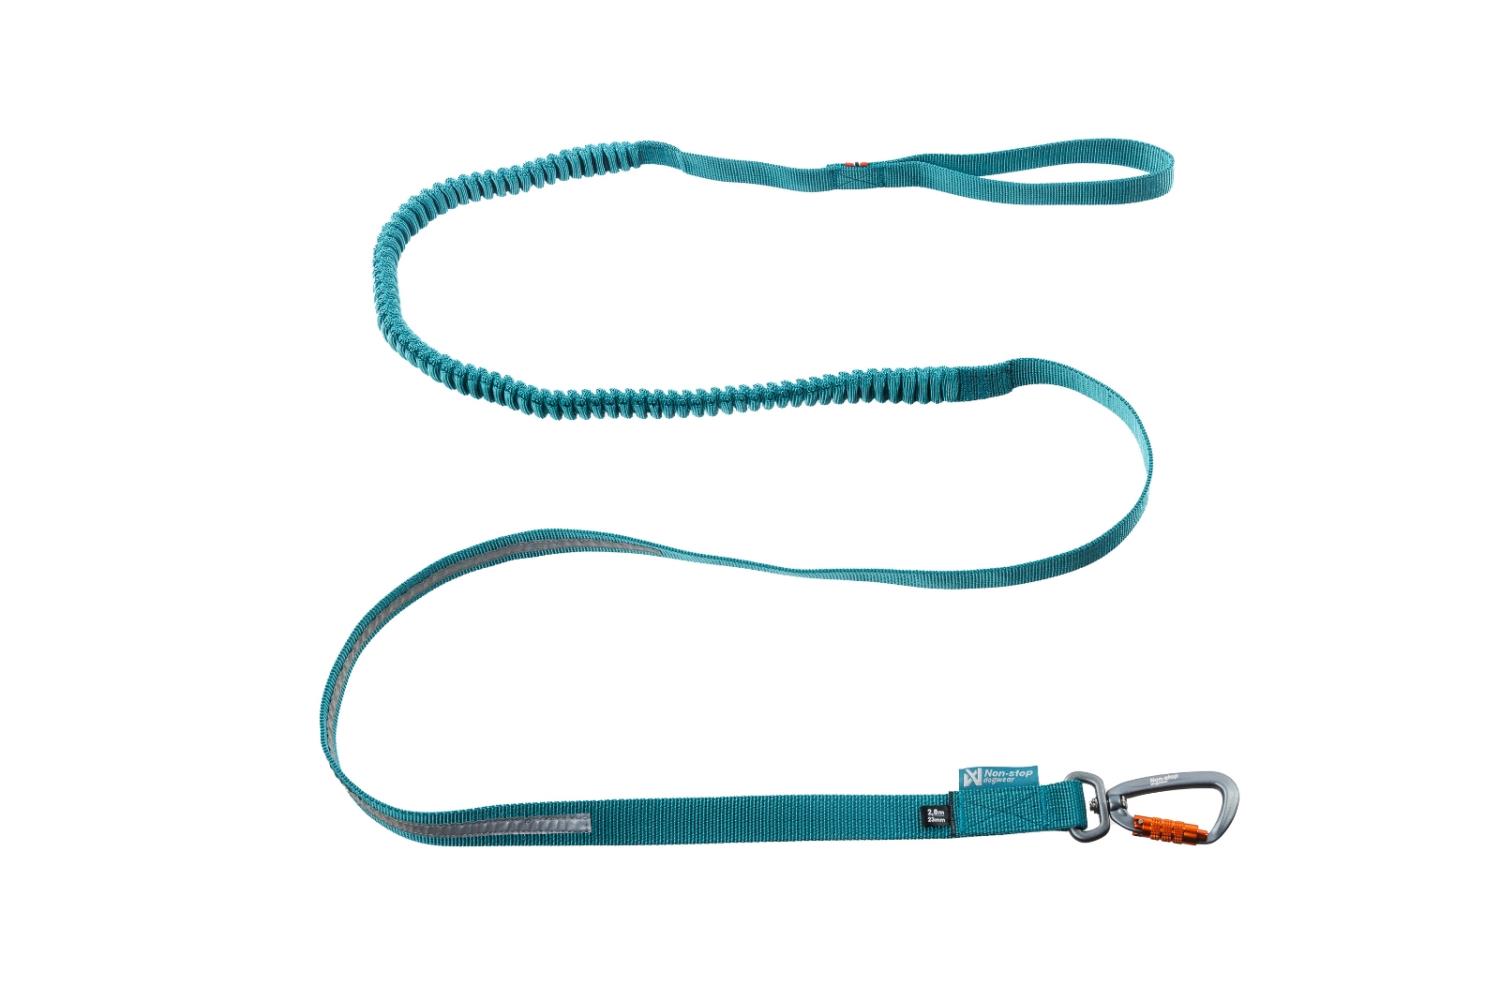 Touring bungee leash 3.8m/23mm, unisex, teal, single, Non-stop